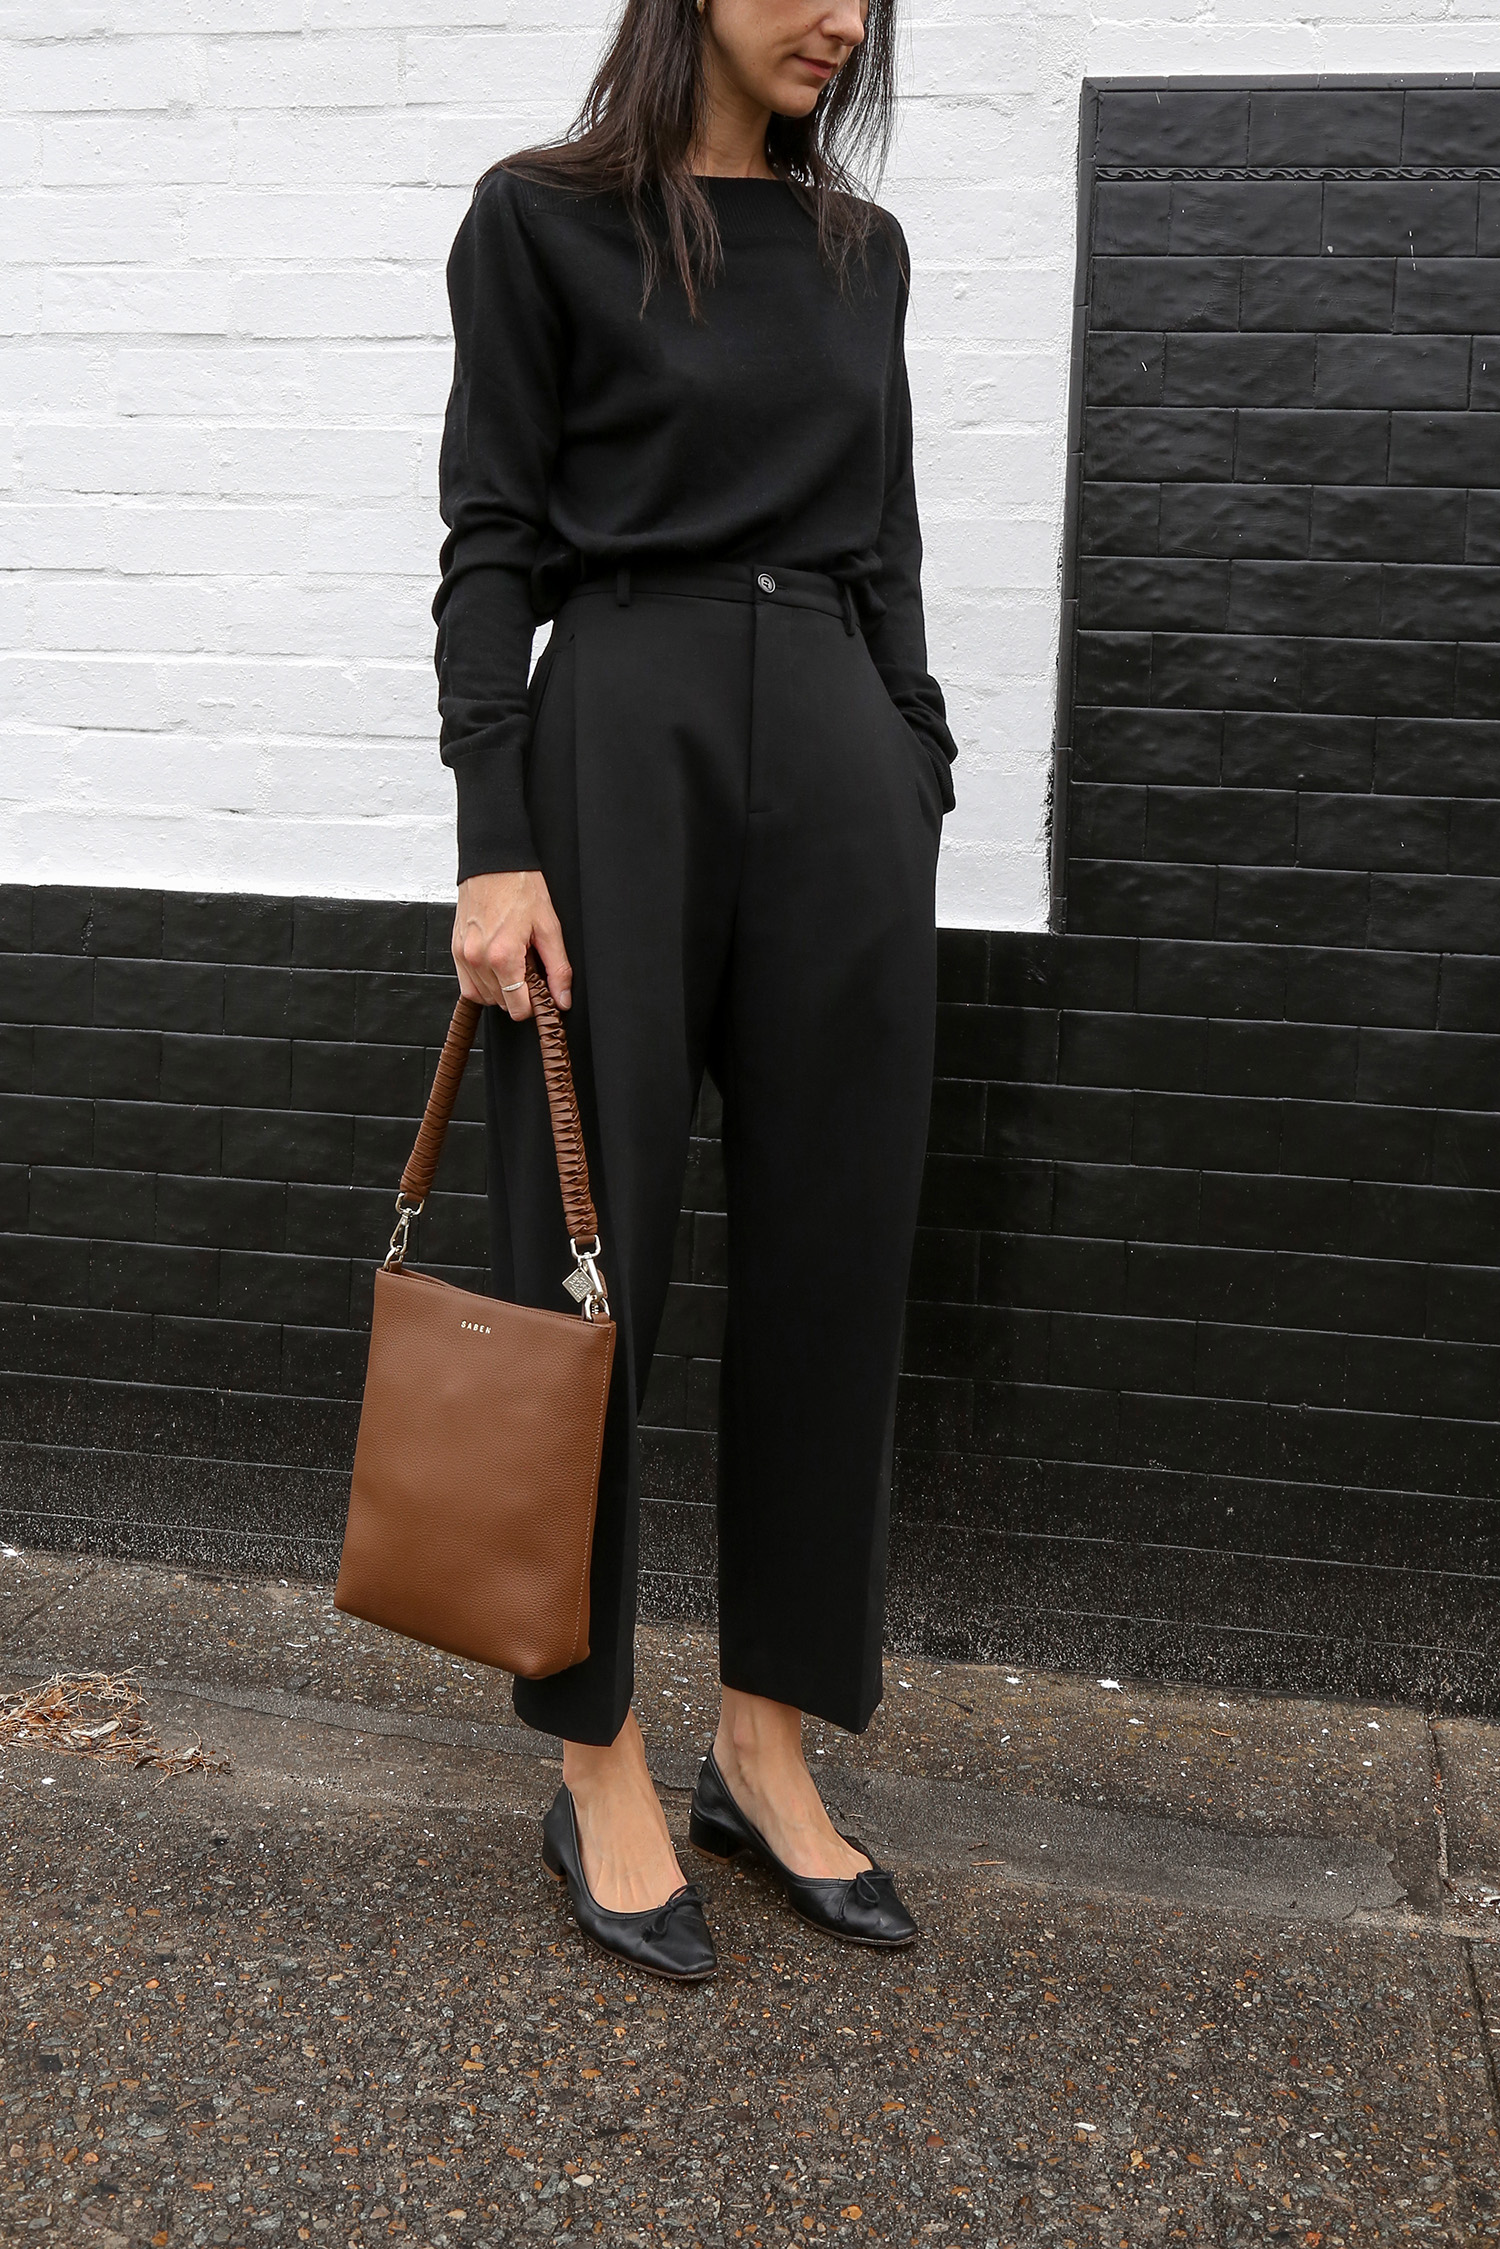 Facade Pattern round wool trousers review